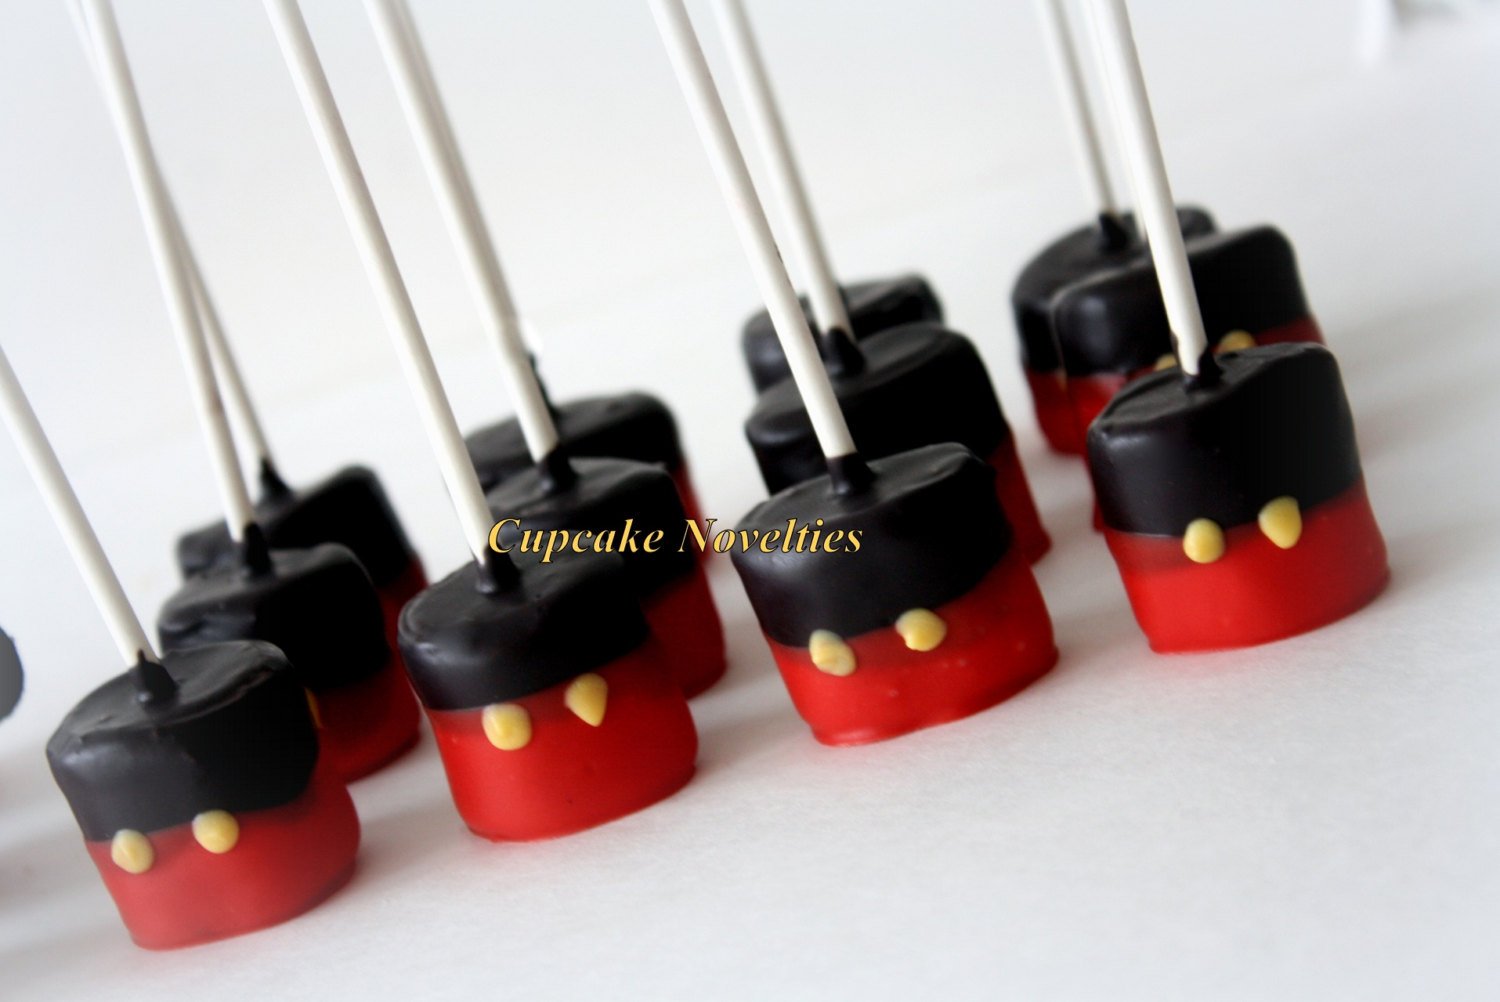 Red Black Yellow Buttons Boy Birthday Party Favors Gourmet Chocolate dipped Marshmallows Boy Birthday Cookies Dessert Table Classroom Treats